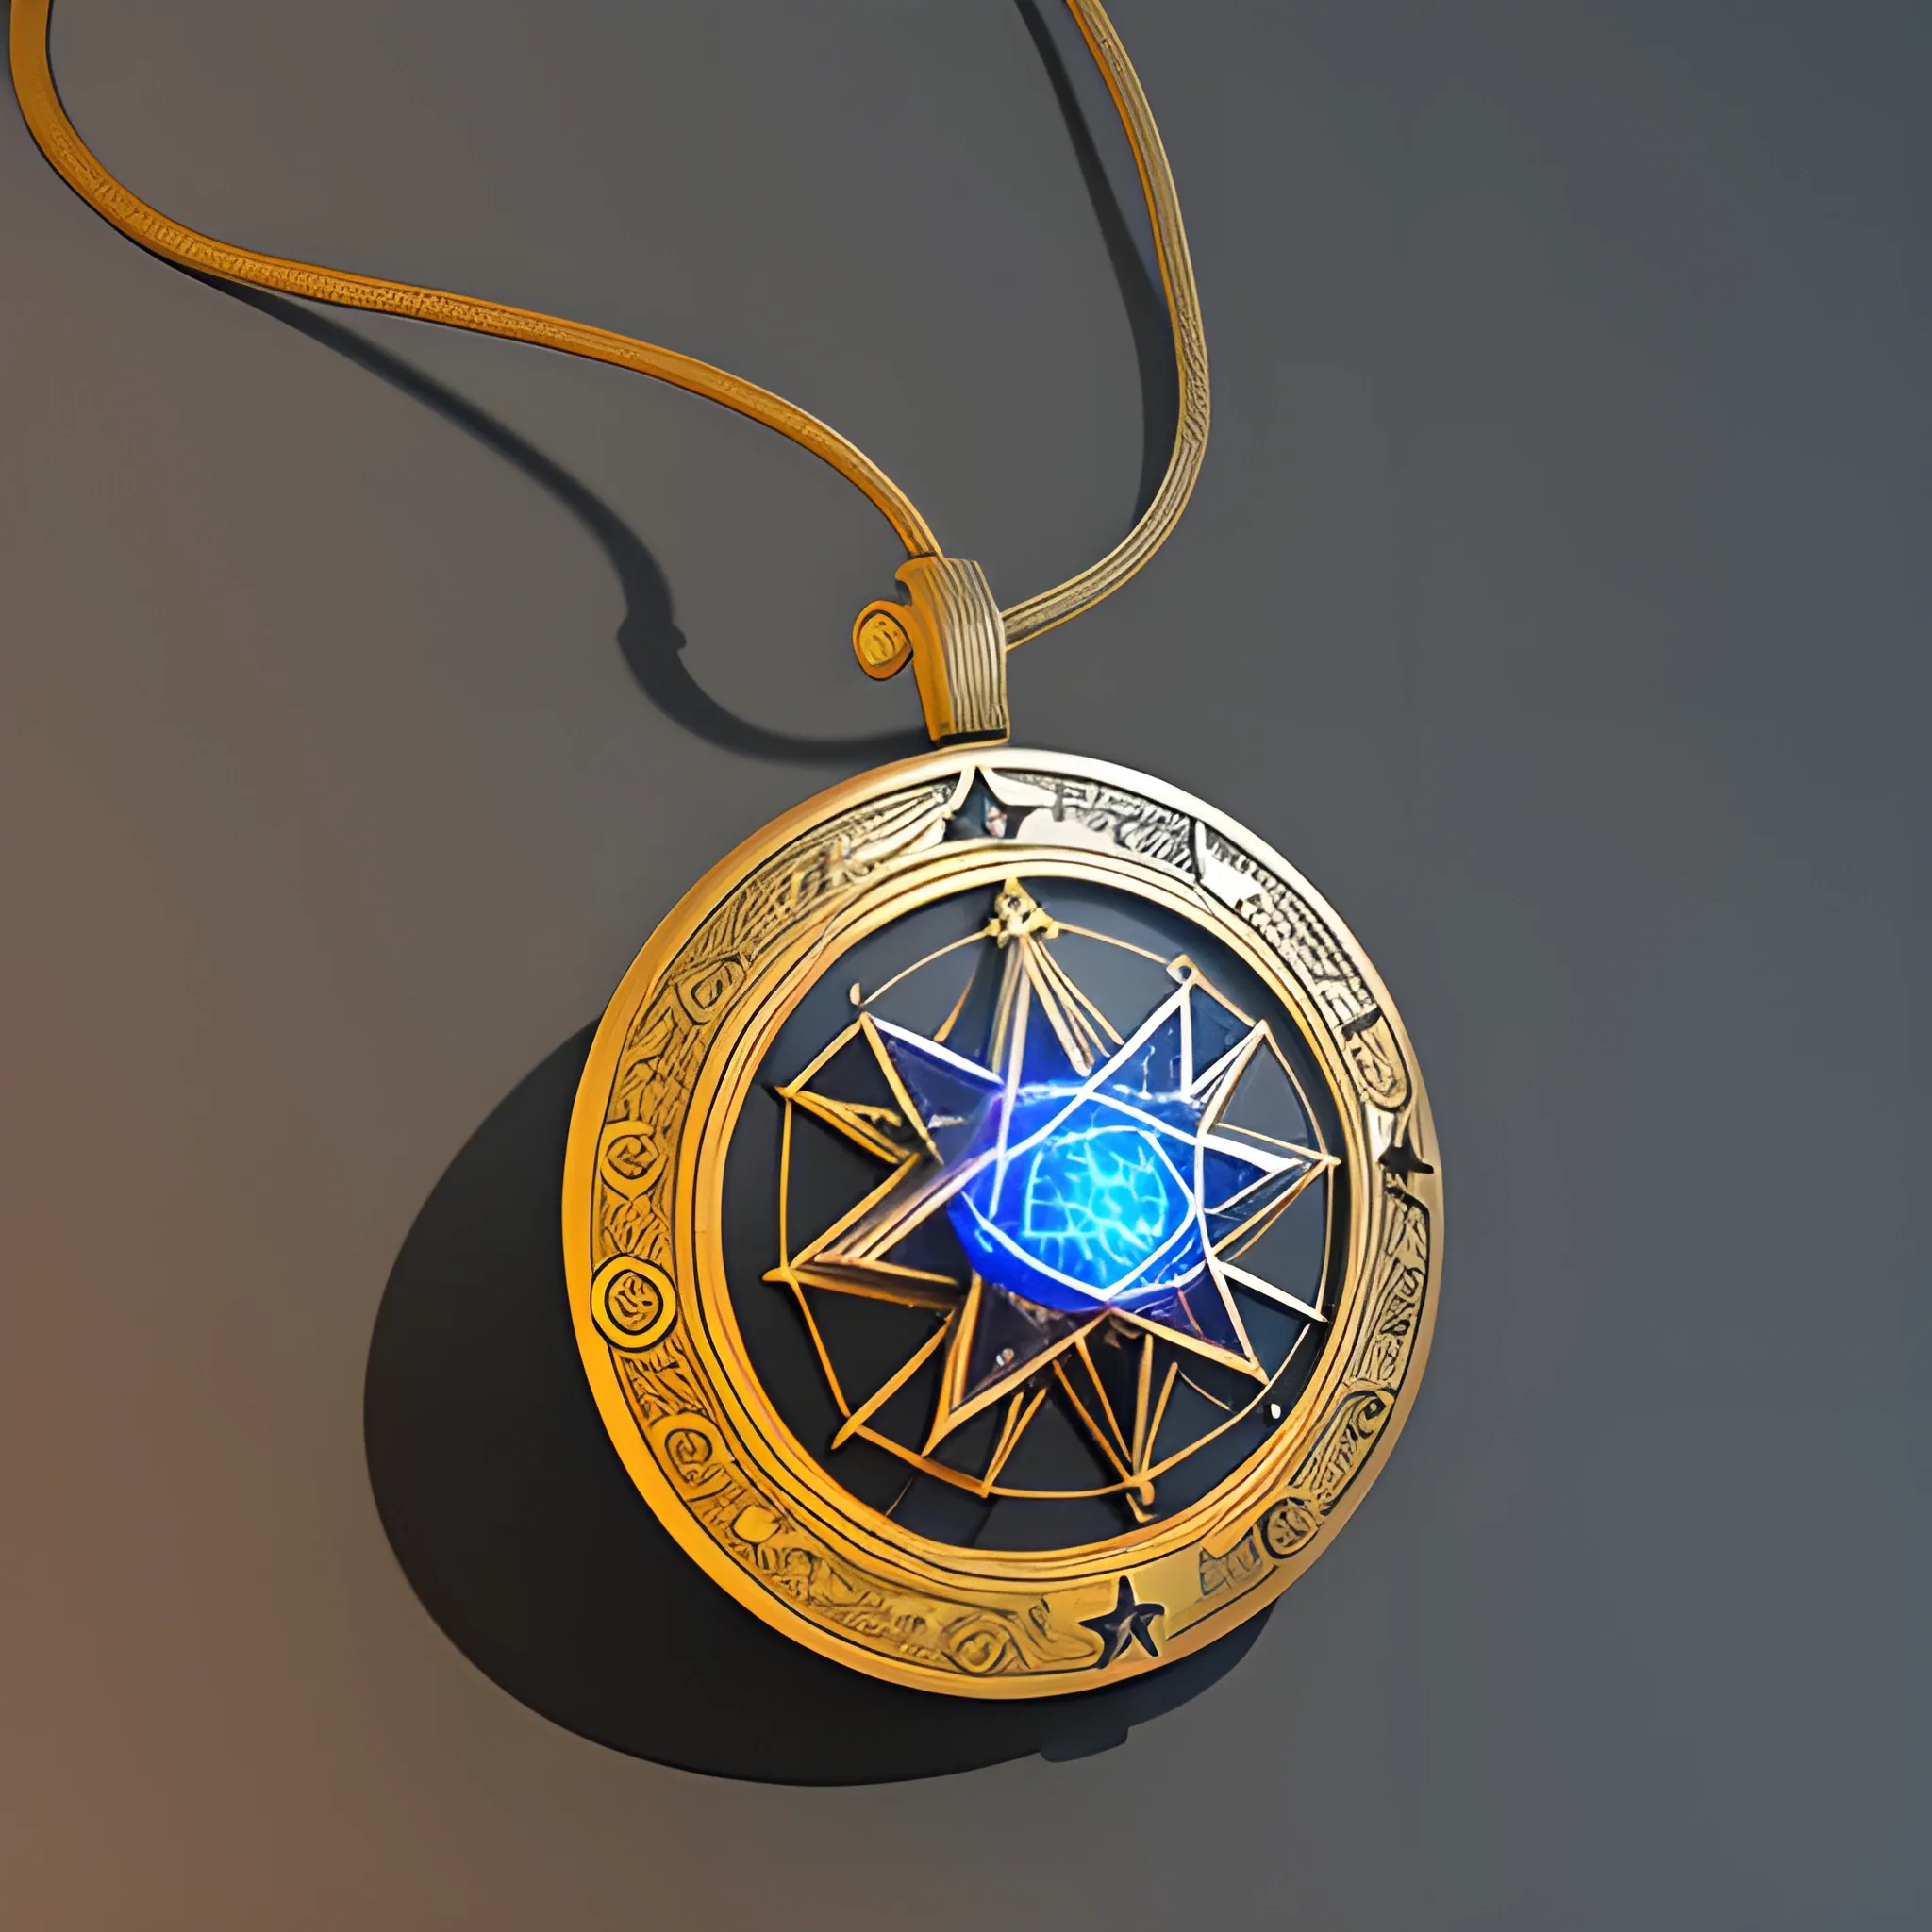 Can you make an AI design of an amulet bestowed by a goddess of the moon, stars, and magic, 3D